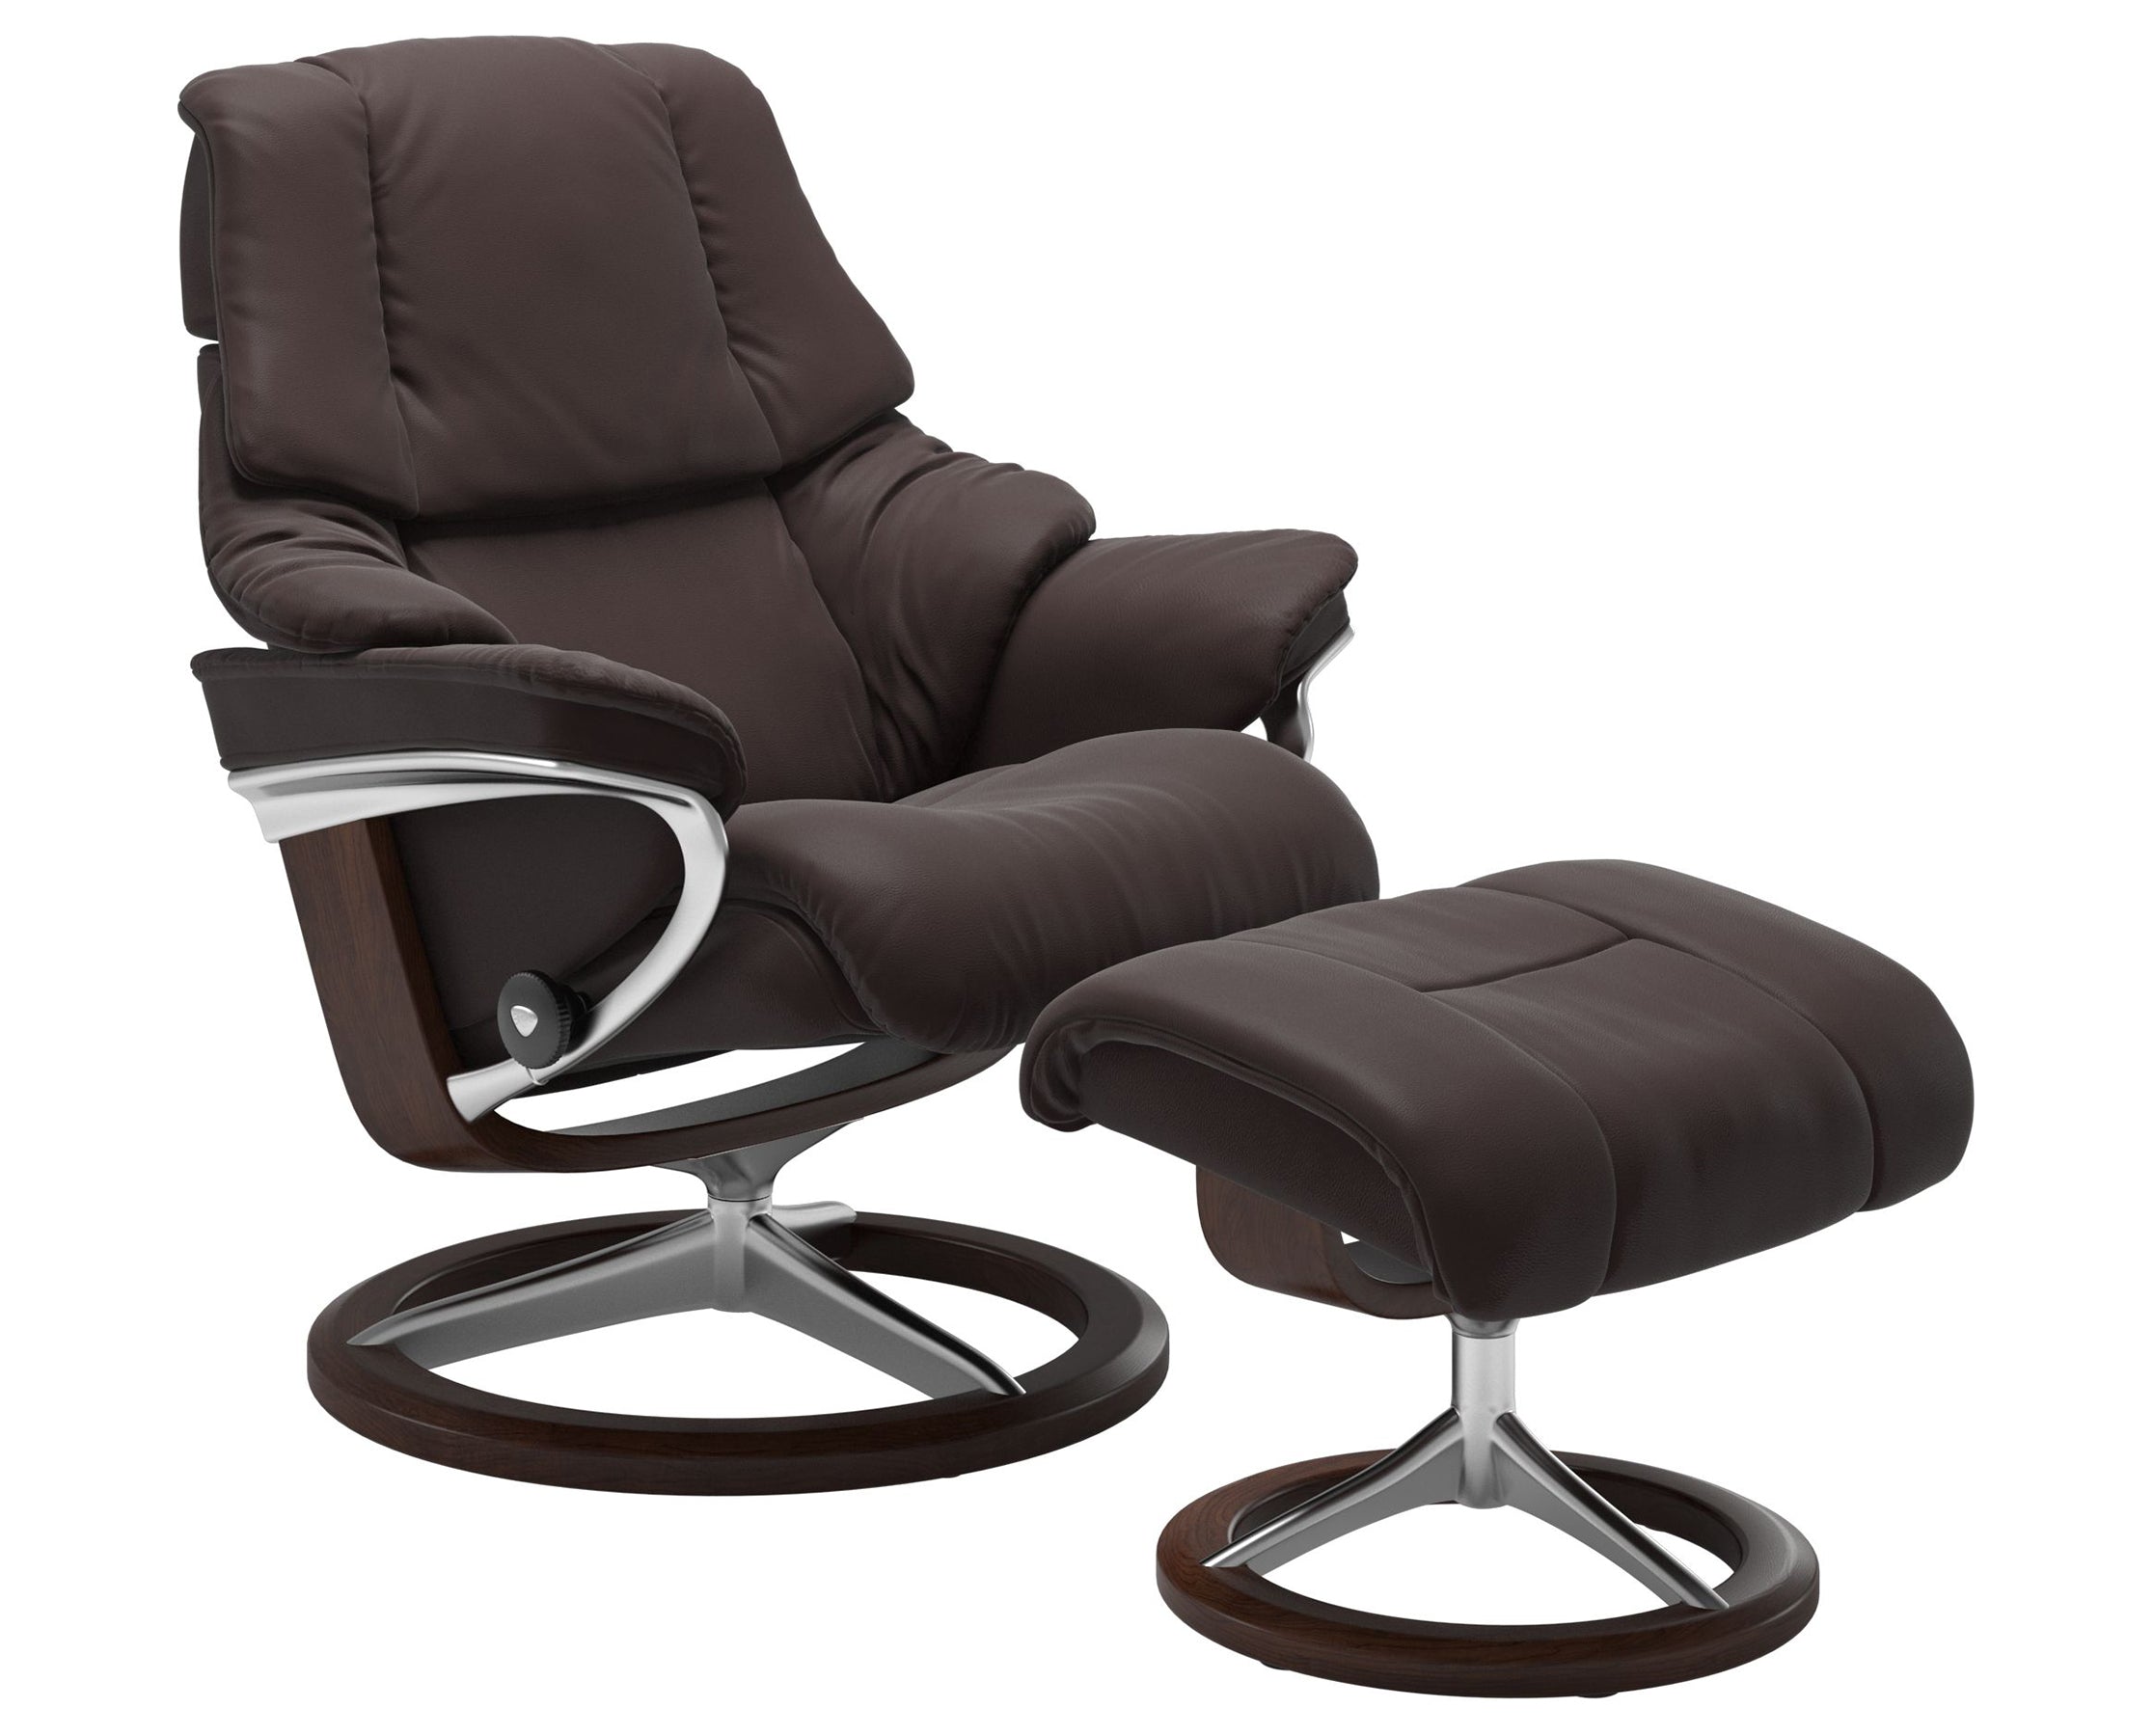 Paloma Leather Chocolate S/M/L and Brown Base | Stressless Reno Signature Recliner | Valley Ridge Furniture